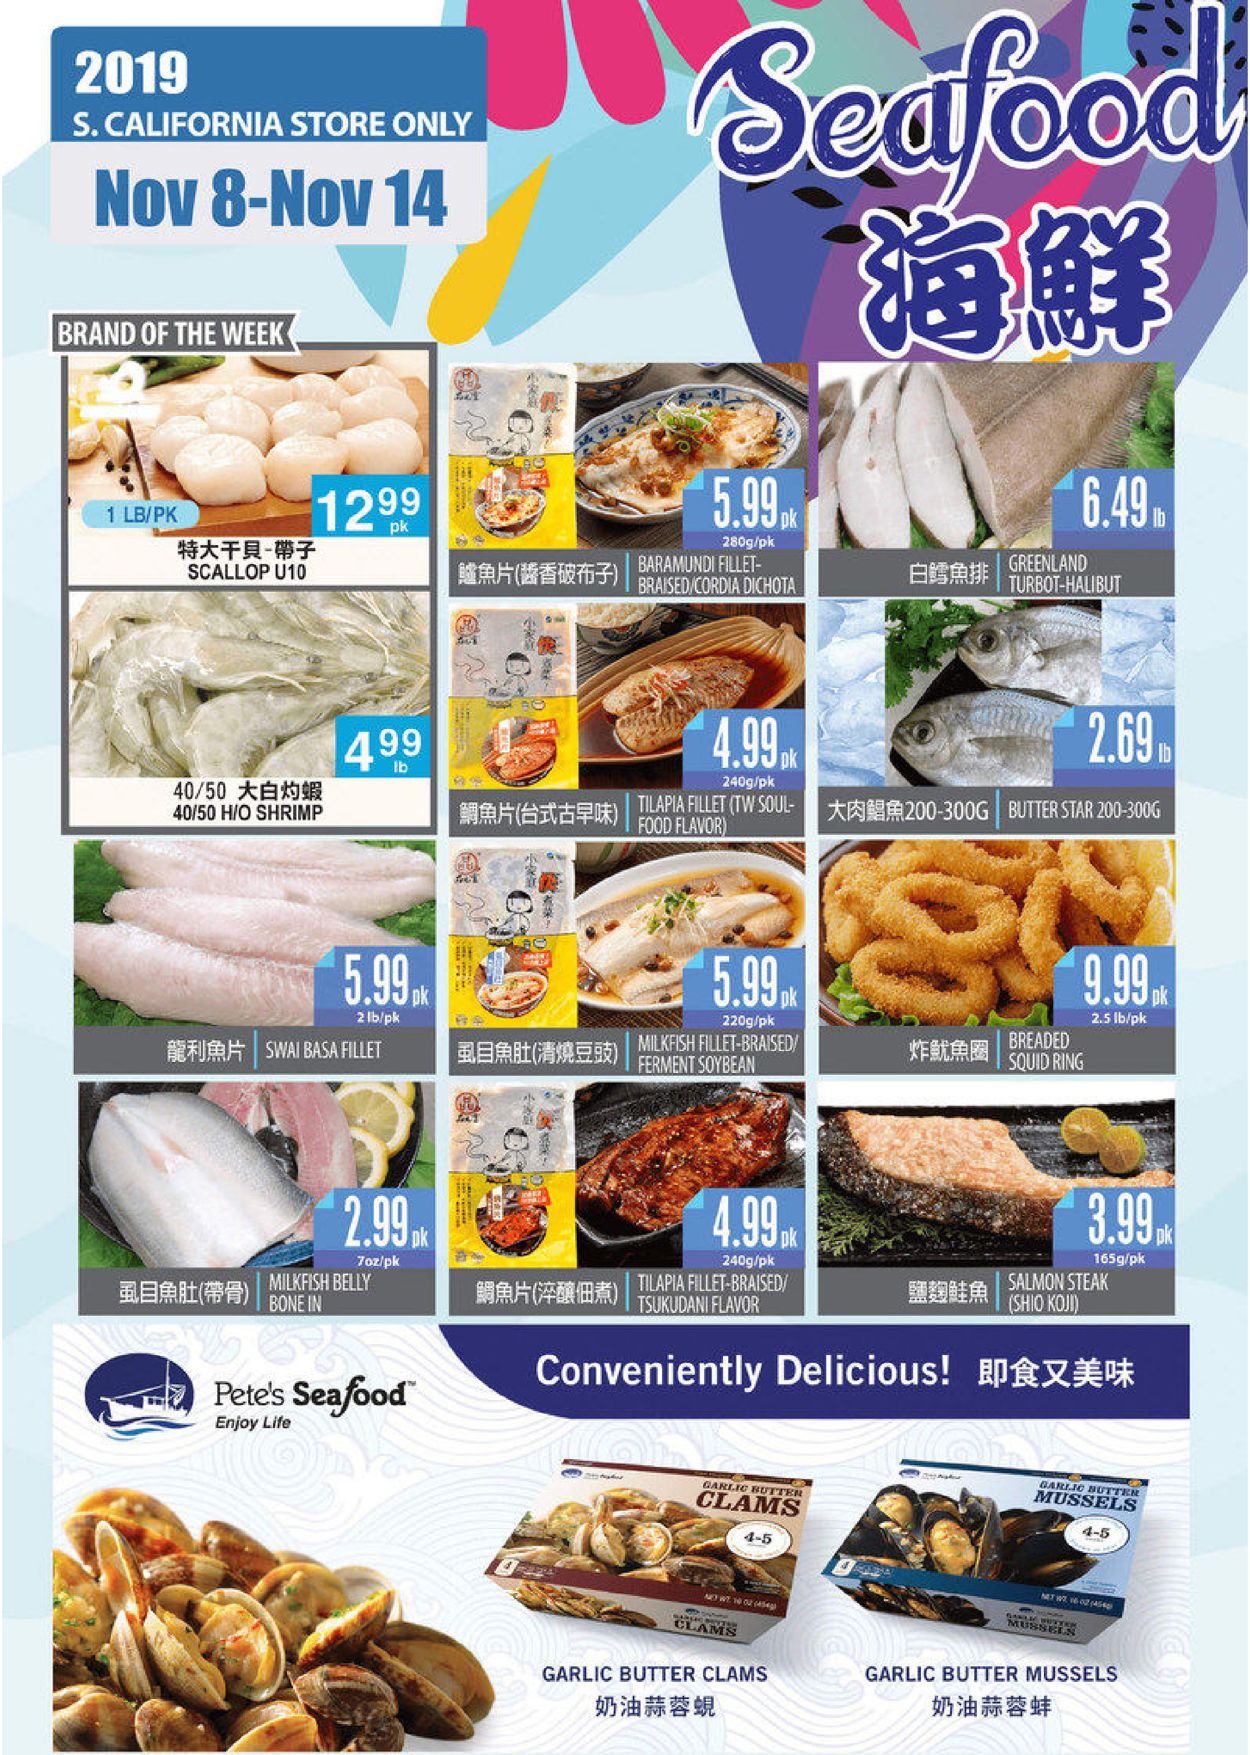 99 Ranch Current weekly ad 11/08 11/14/2019 [3]